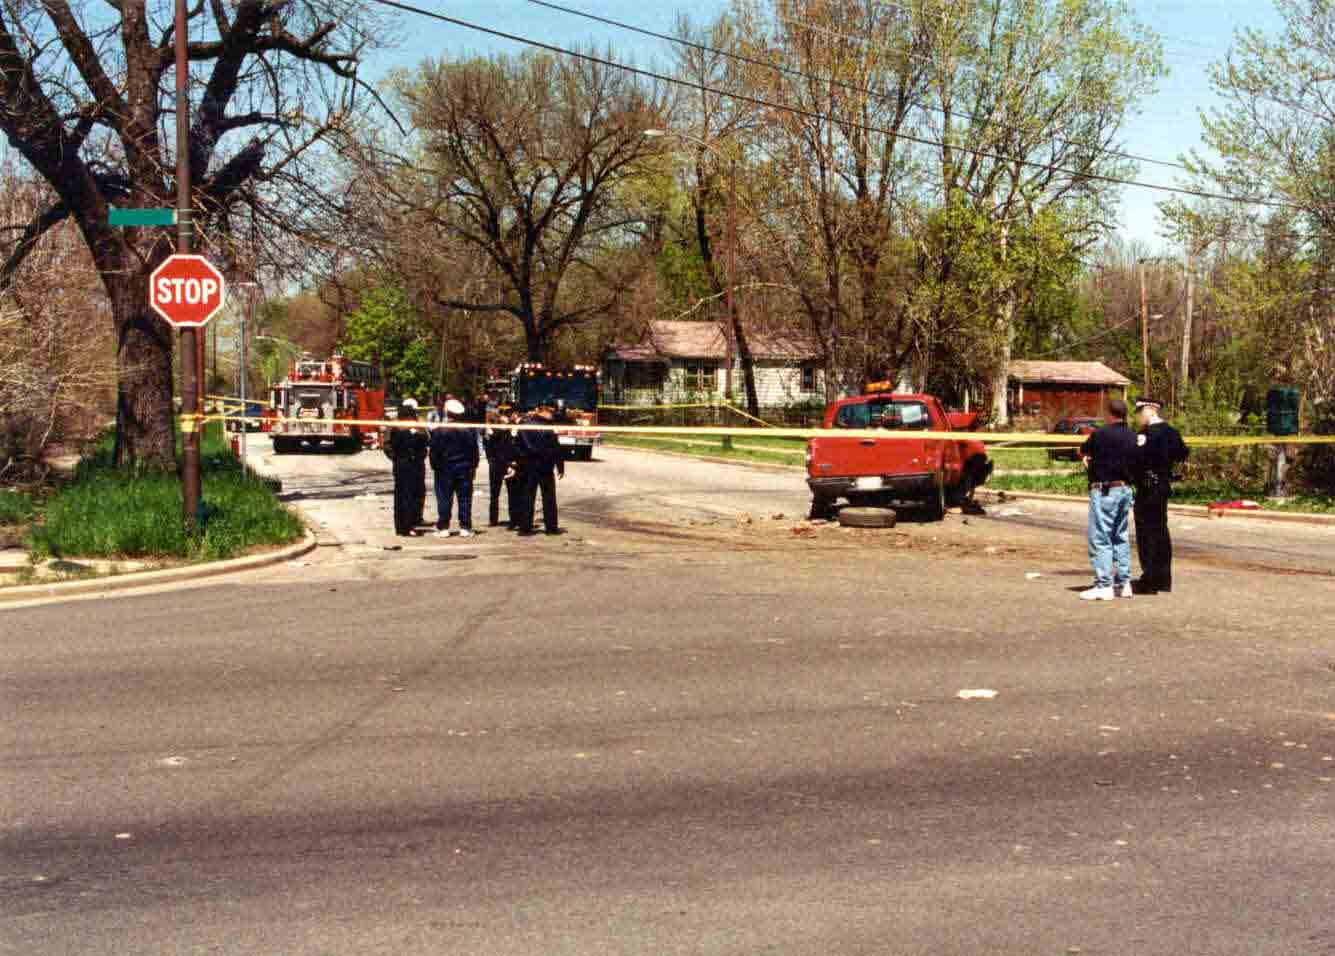 Photograph of the intersection and final resting places of the vehicles involved in this incident.